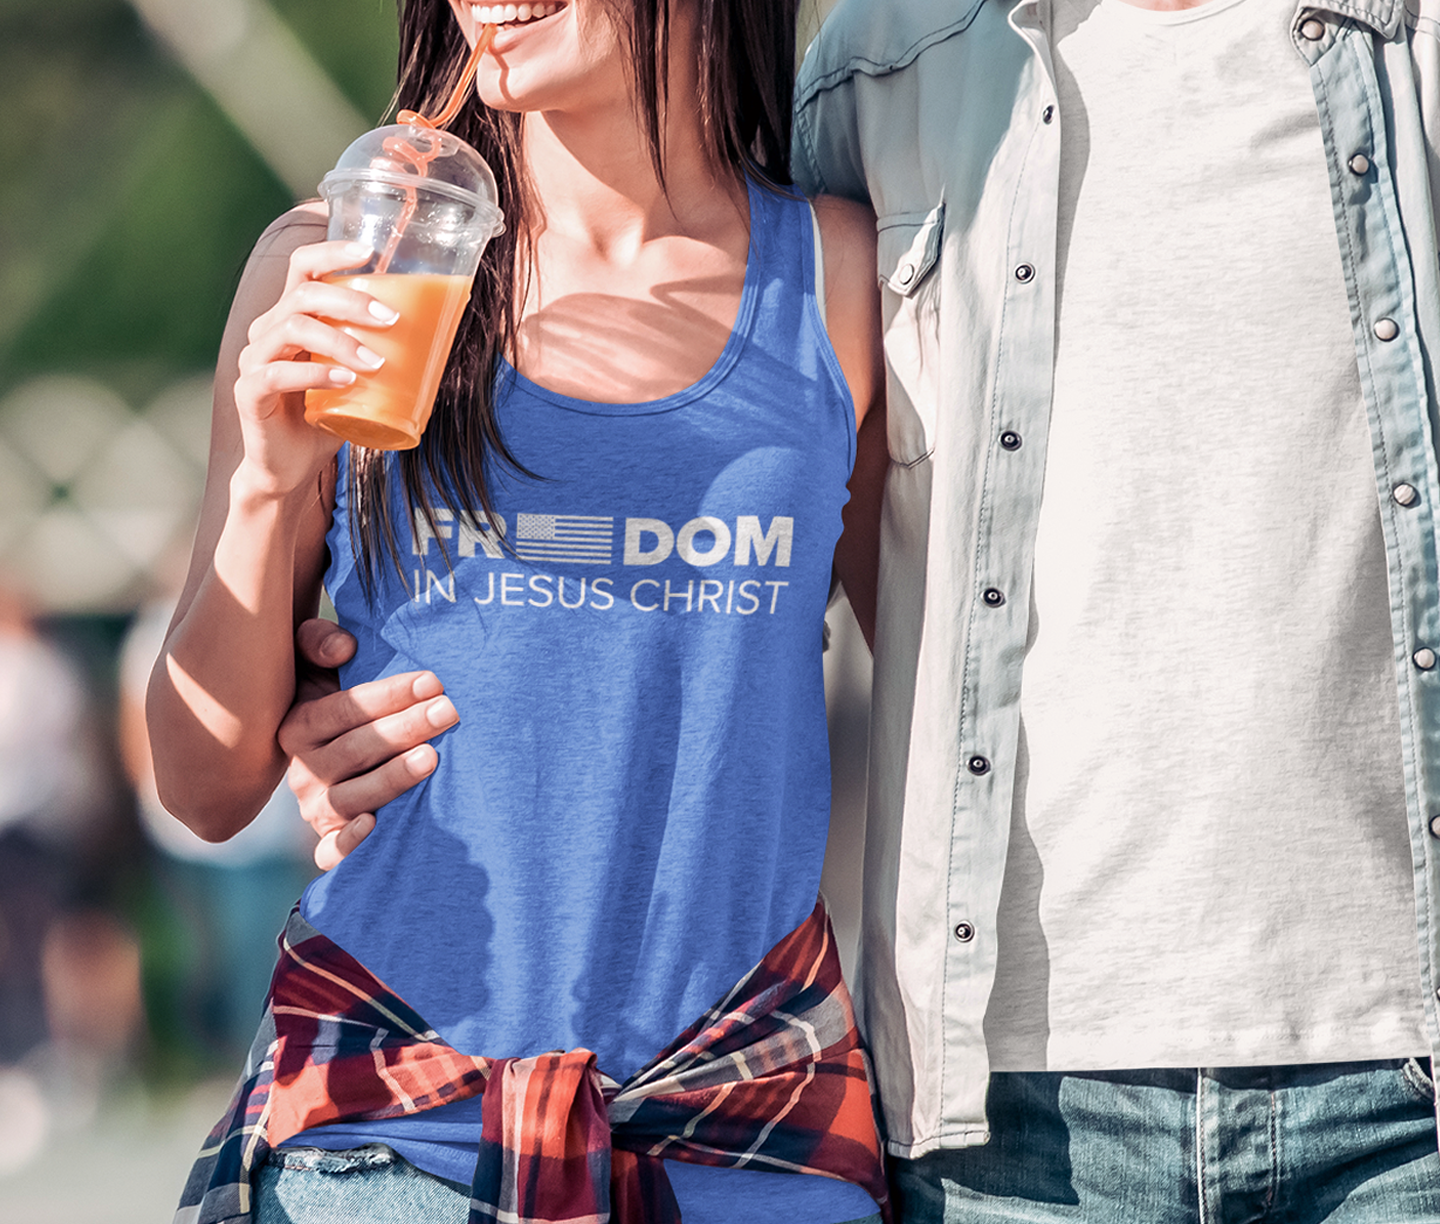 FREEDOM IN JESUS CHRIST TANK FRONT - CHRISTIAN CLOTHING